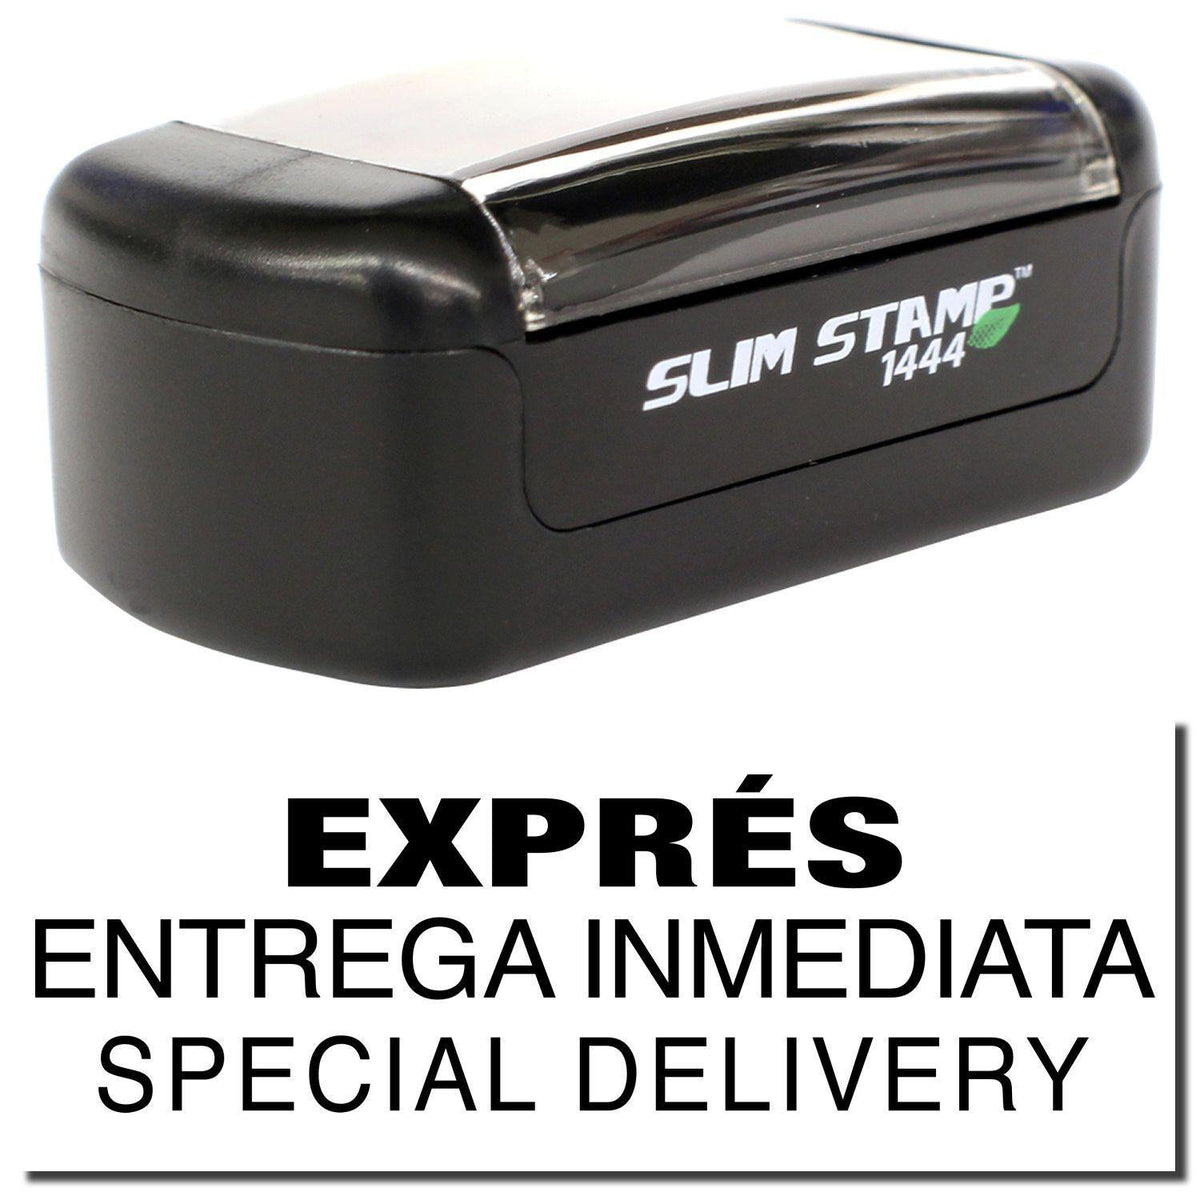 A stock office pre-inked stamp with a stamped image showing how the text &quot;EXPRES ENTREGA INMEDIATA SPECIAL DELIVERY&quot; is displayed after stamping.